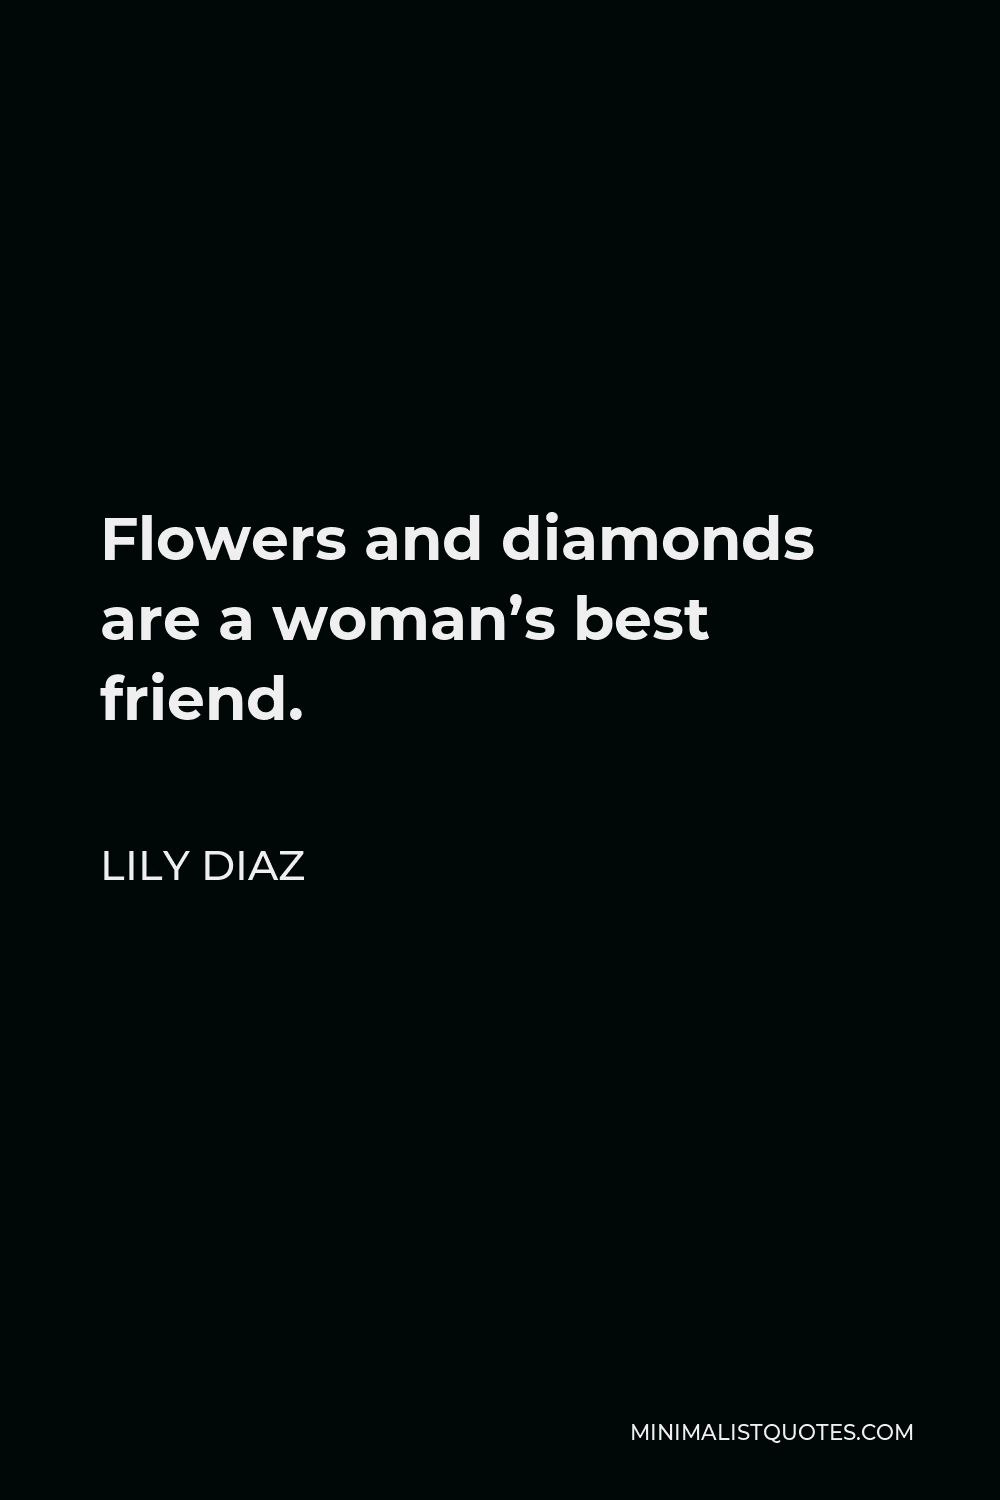 Lily Diaz Quote - Flowers and diamonds are a woman’s best friend.